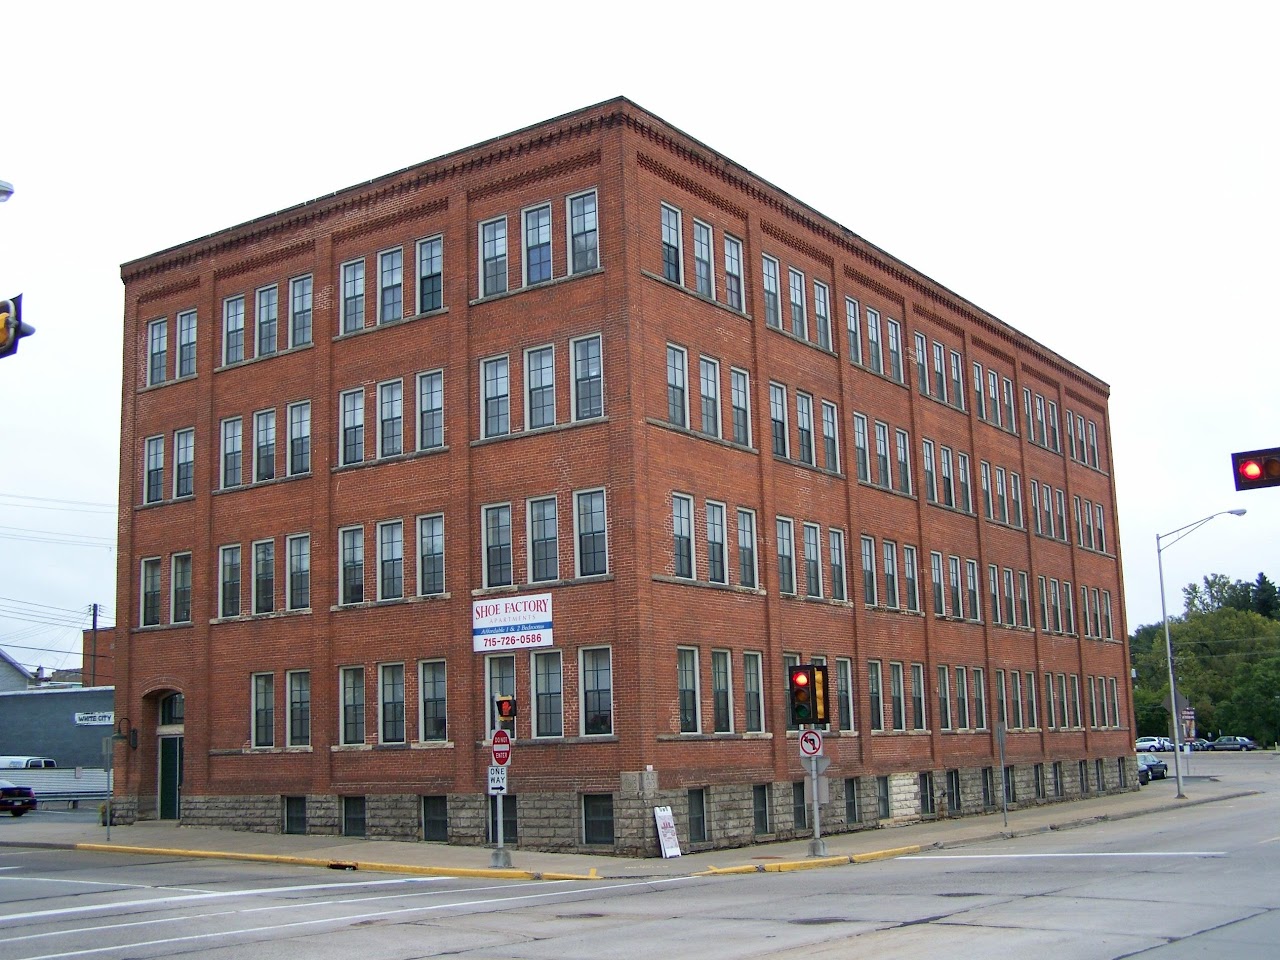 Photo of THE SHOE FACTORY. Affordable housing located at 36 W RIVER ST CHIPPEWA FALLS, WI 54729